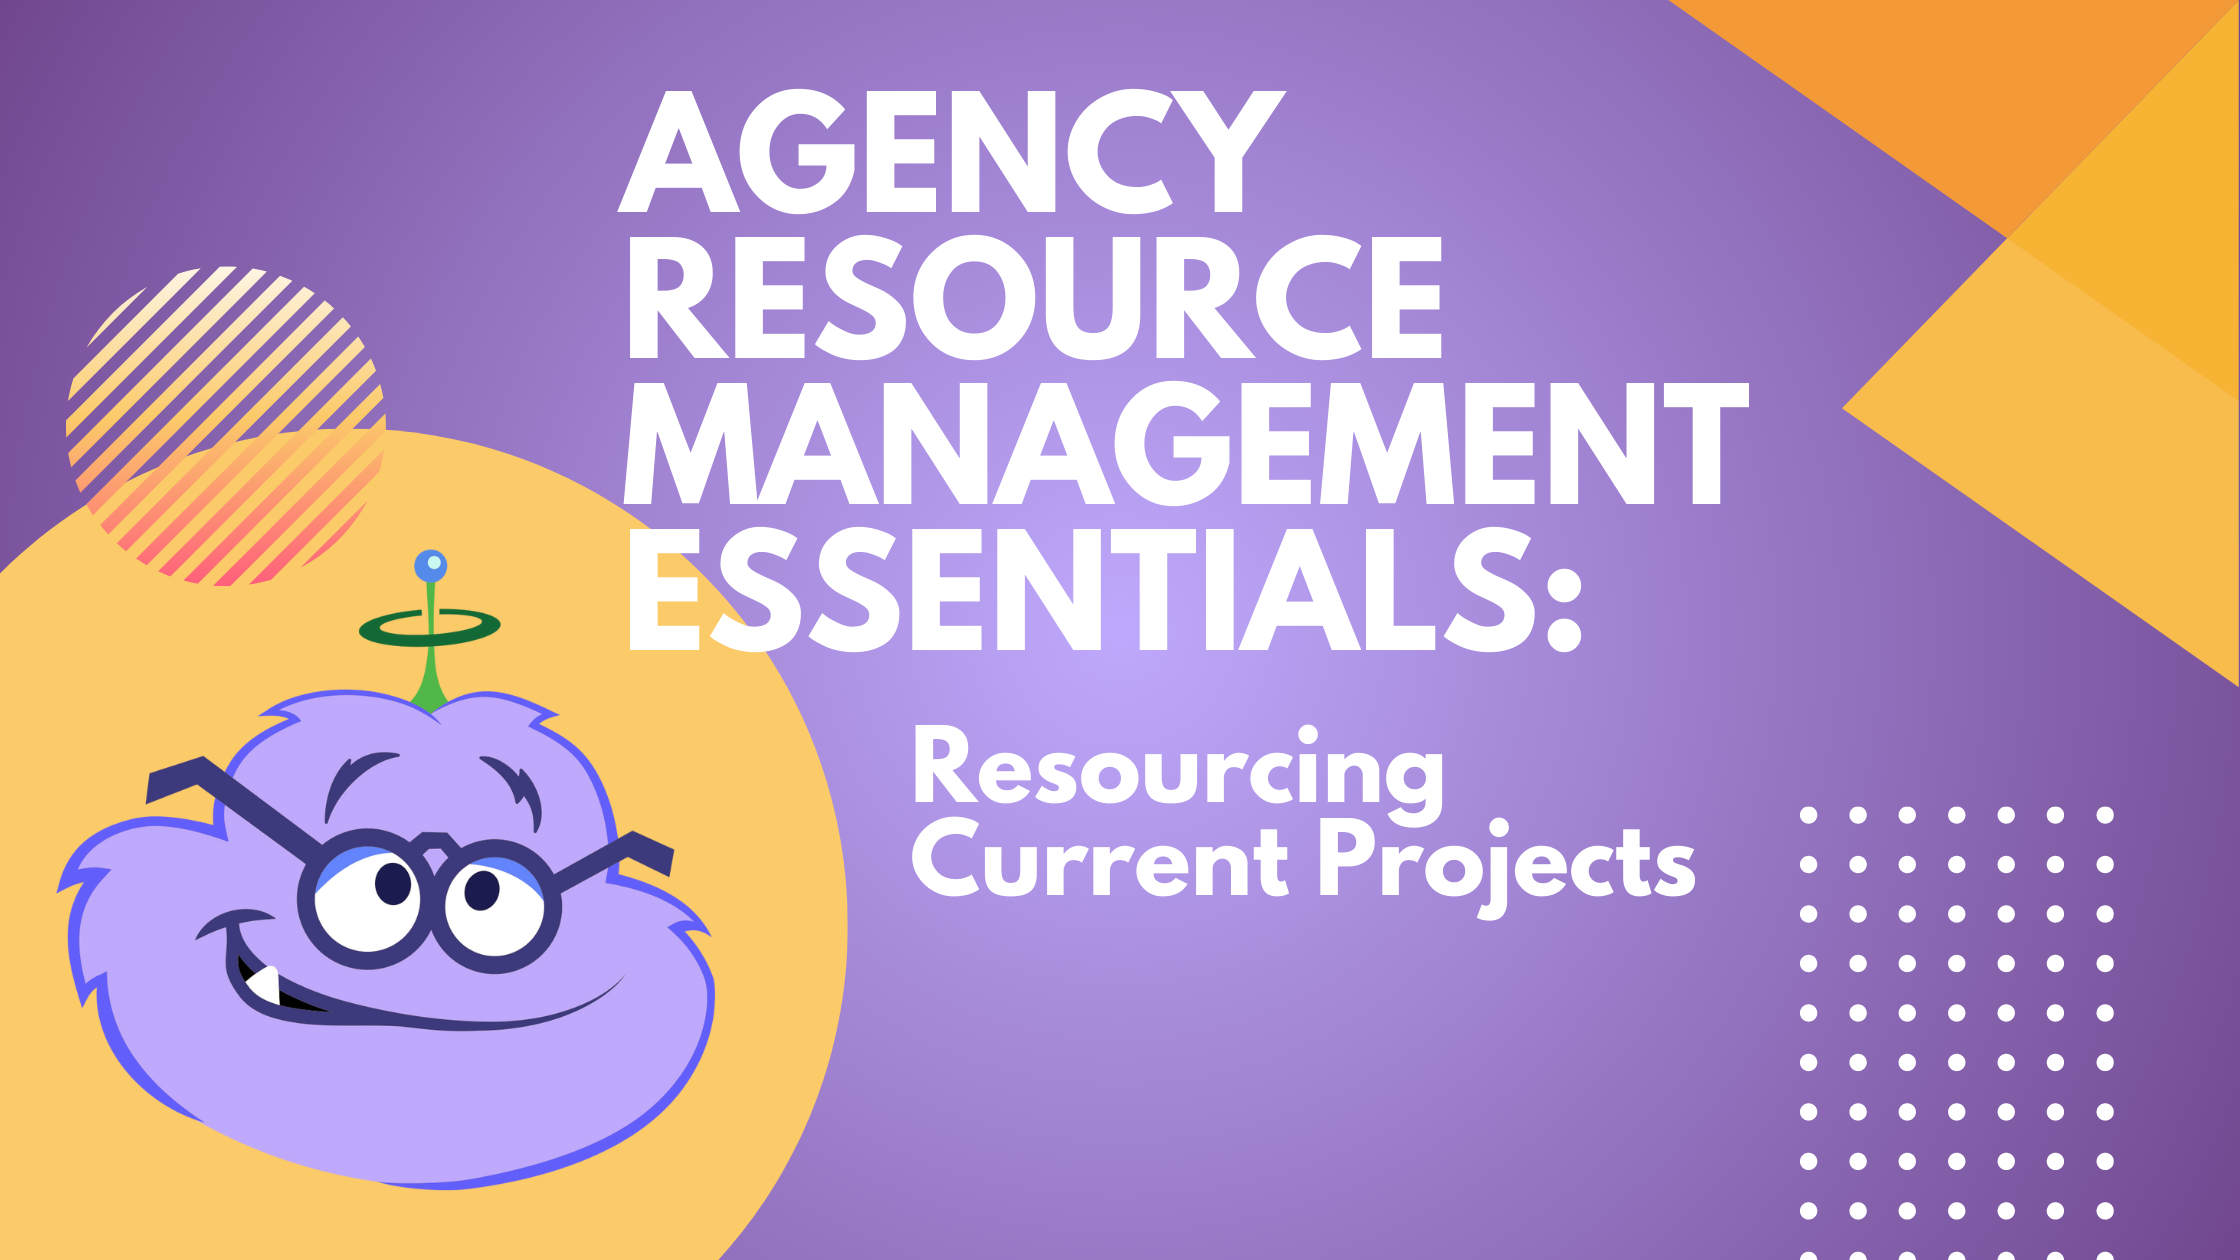 Agency Resource Management Essentials: Resourcing Current Projects